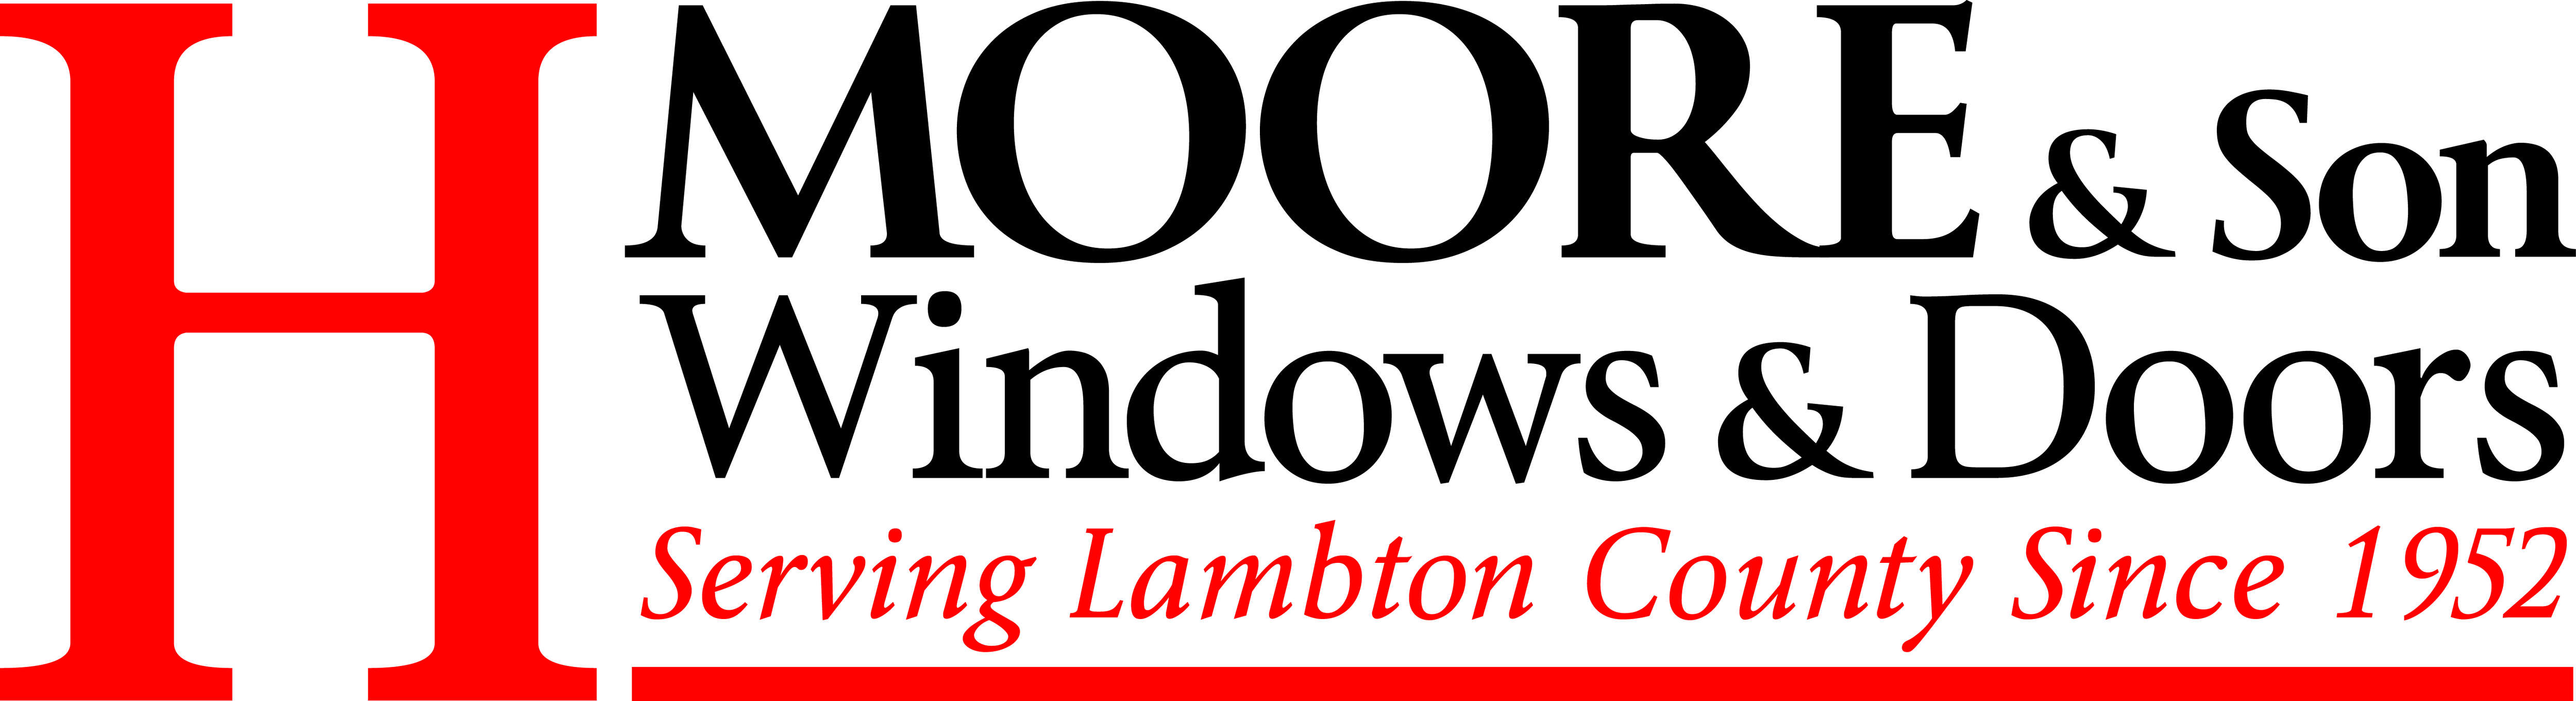 H Moore and Sons Windows